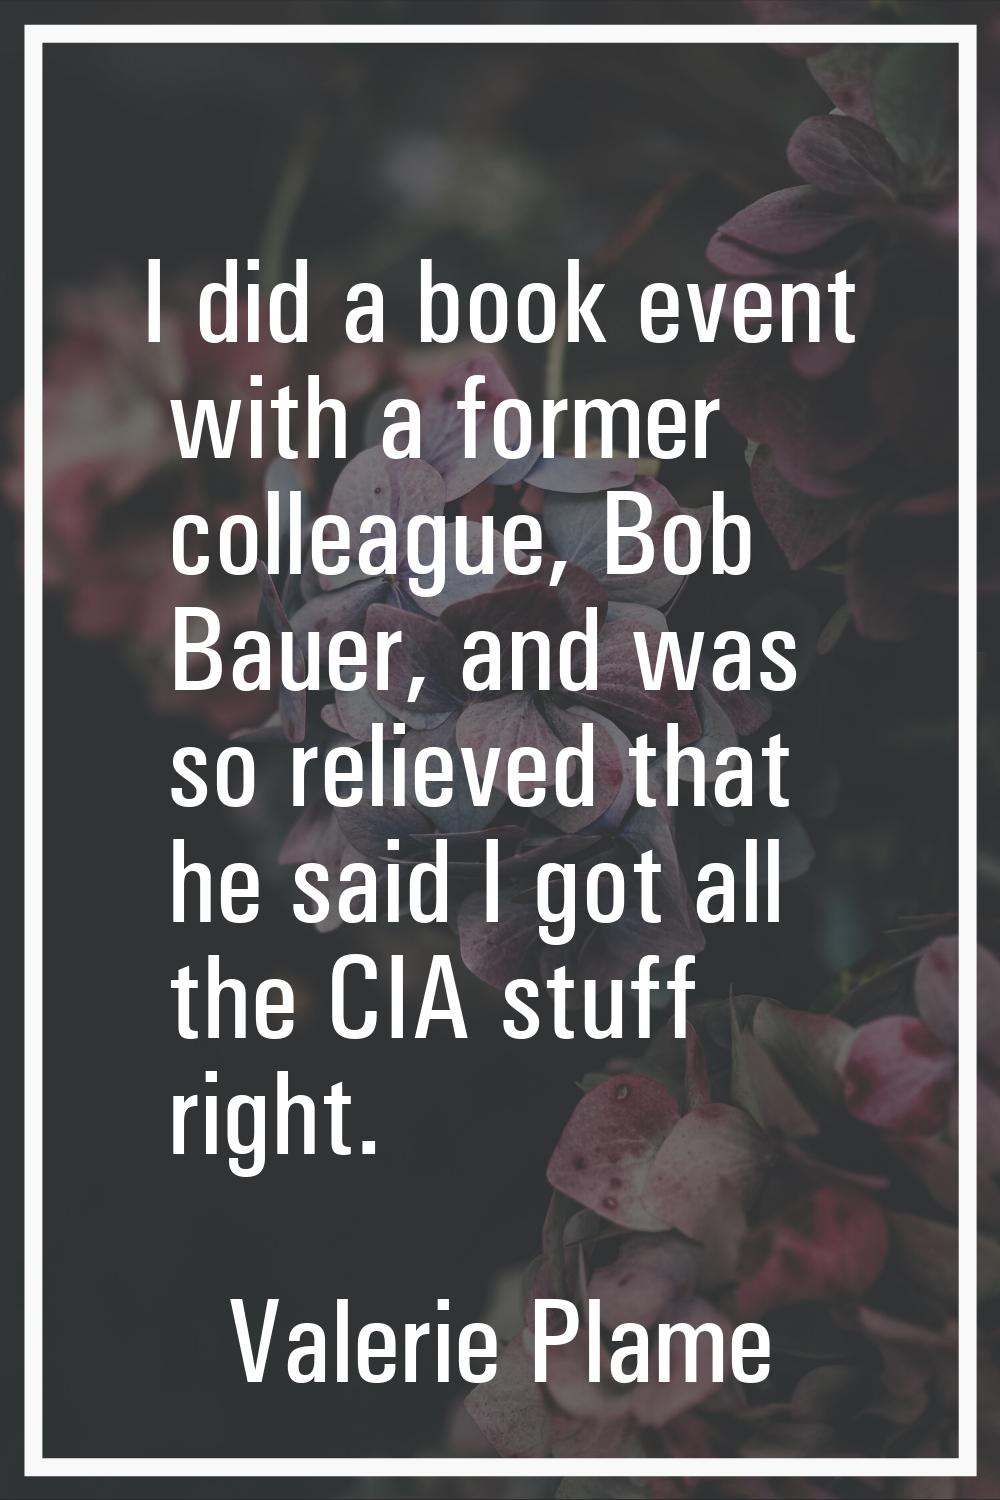 I did a book event with a former colleague, Bob Bauer, and was so relieved that he said I got all t